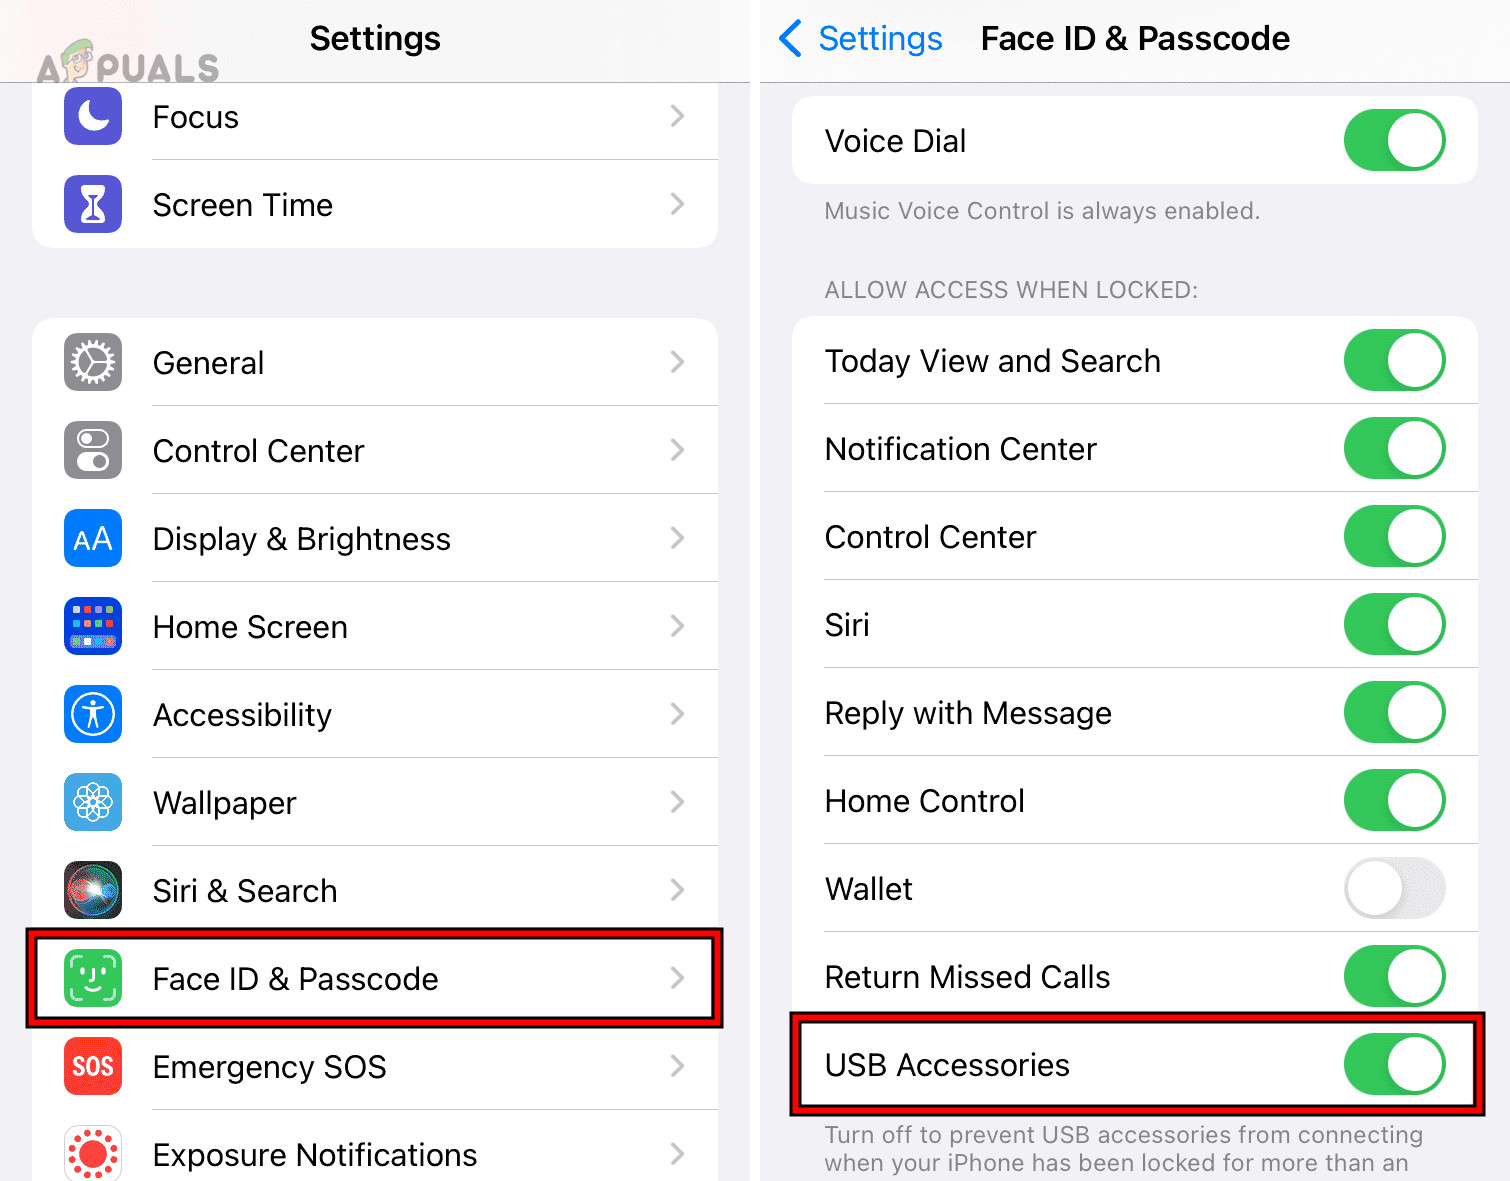 Enable USB Accessories in the iPhone Settings